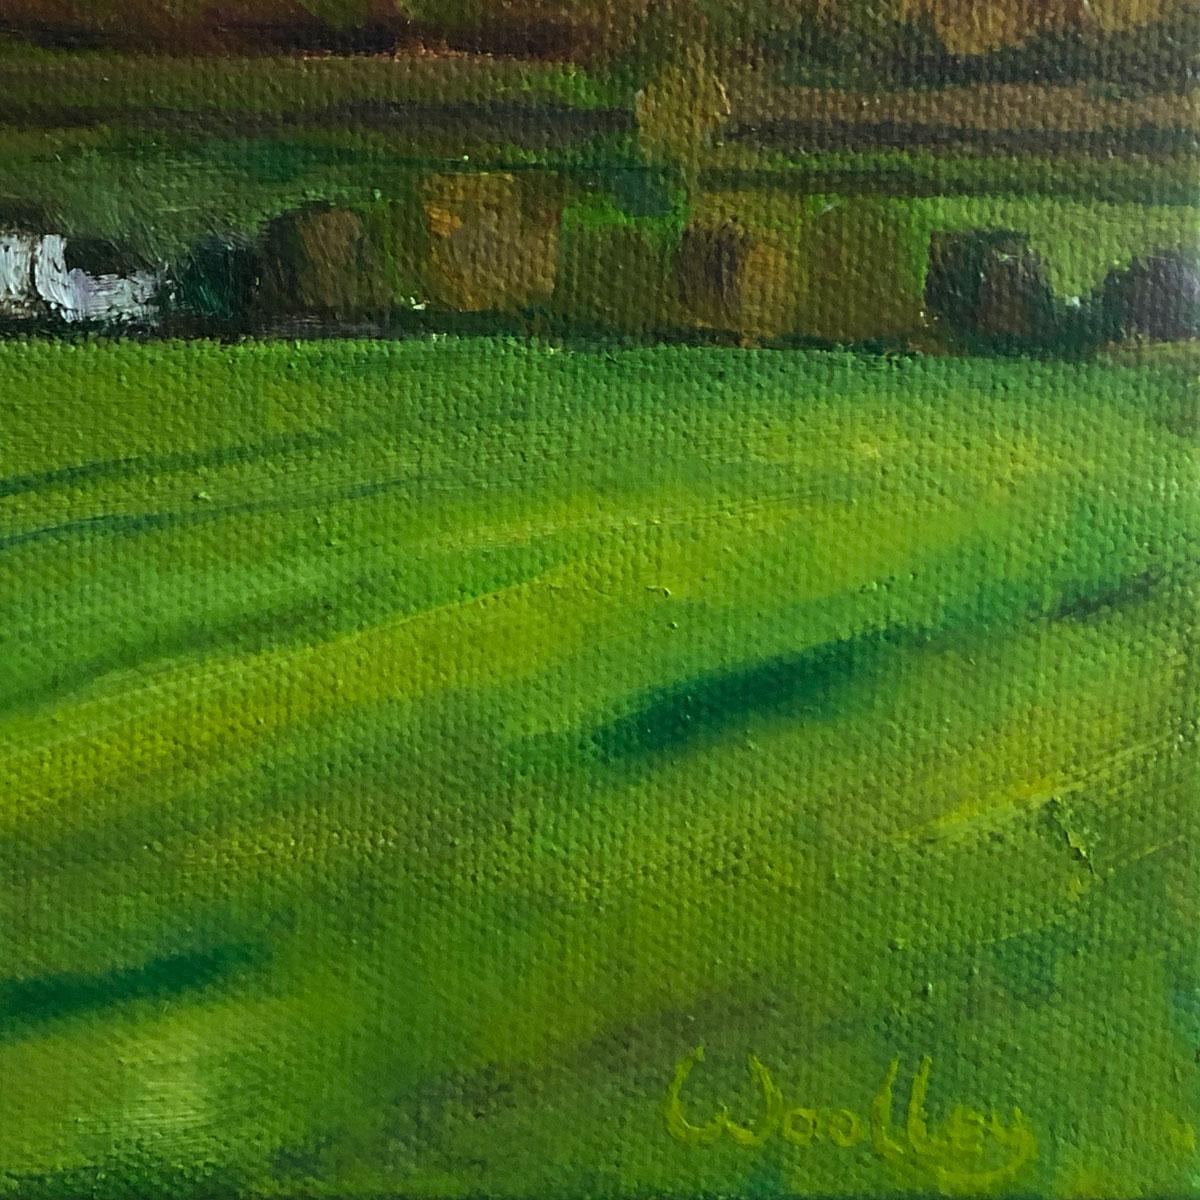 Malvern Sunset by Eleanor Woolley [June 2021]
original and hand signed by the artist 
Oil Paint on Canvas
Image size: H:50 cm x W:50 cm
Complete Size of Unframed Work: H:50 cm x W:50 cm x D:3.5cm
Sold Unframed
Please note that insitu images are